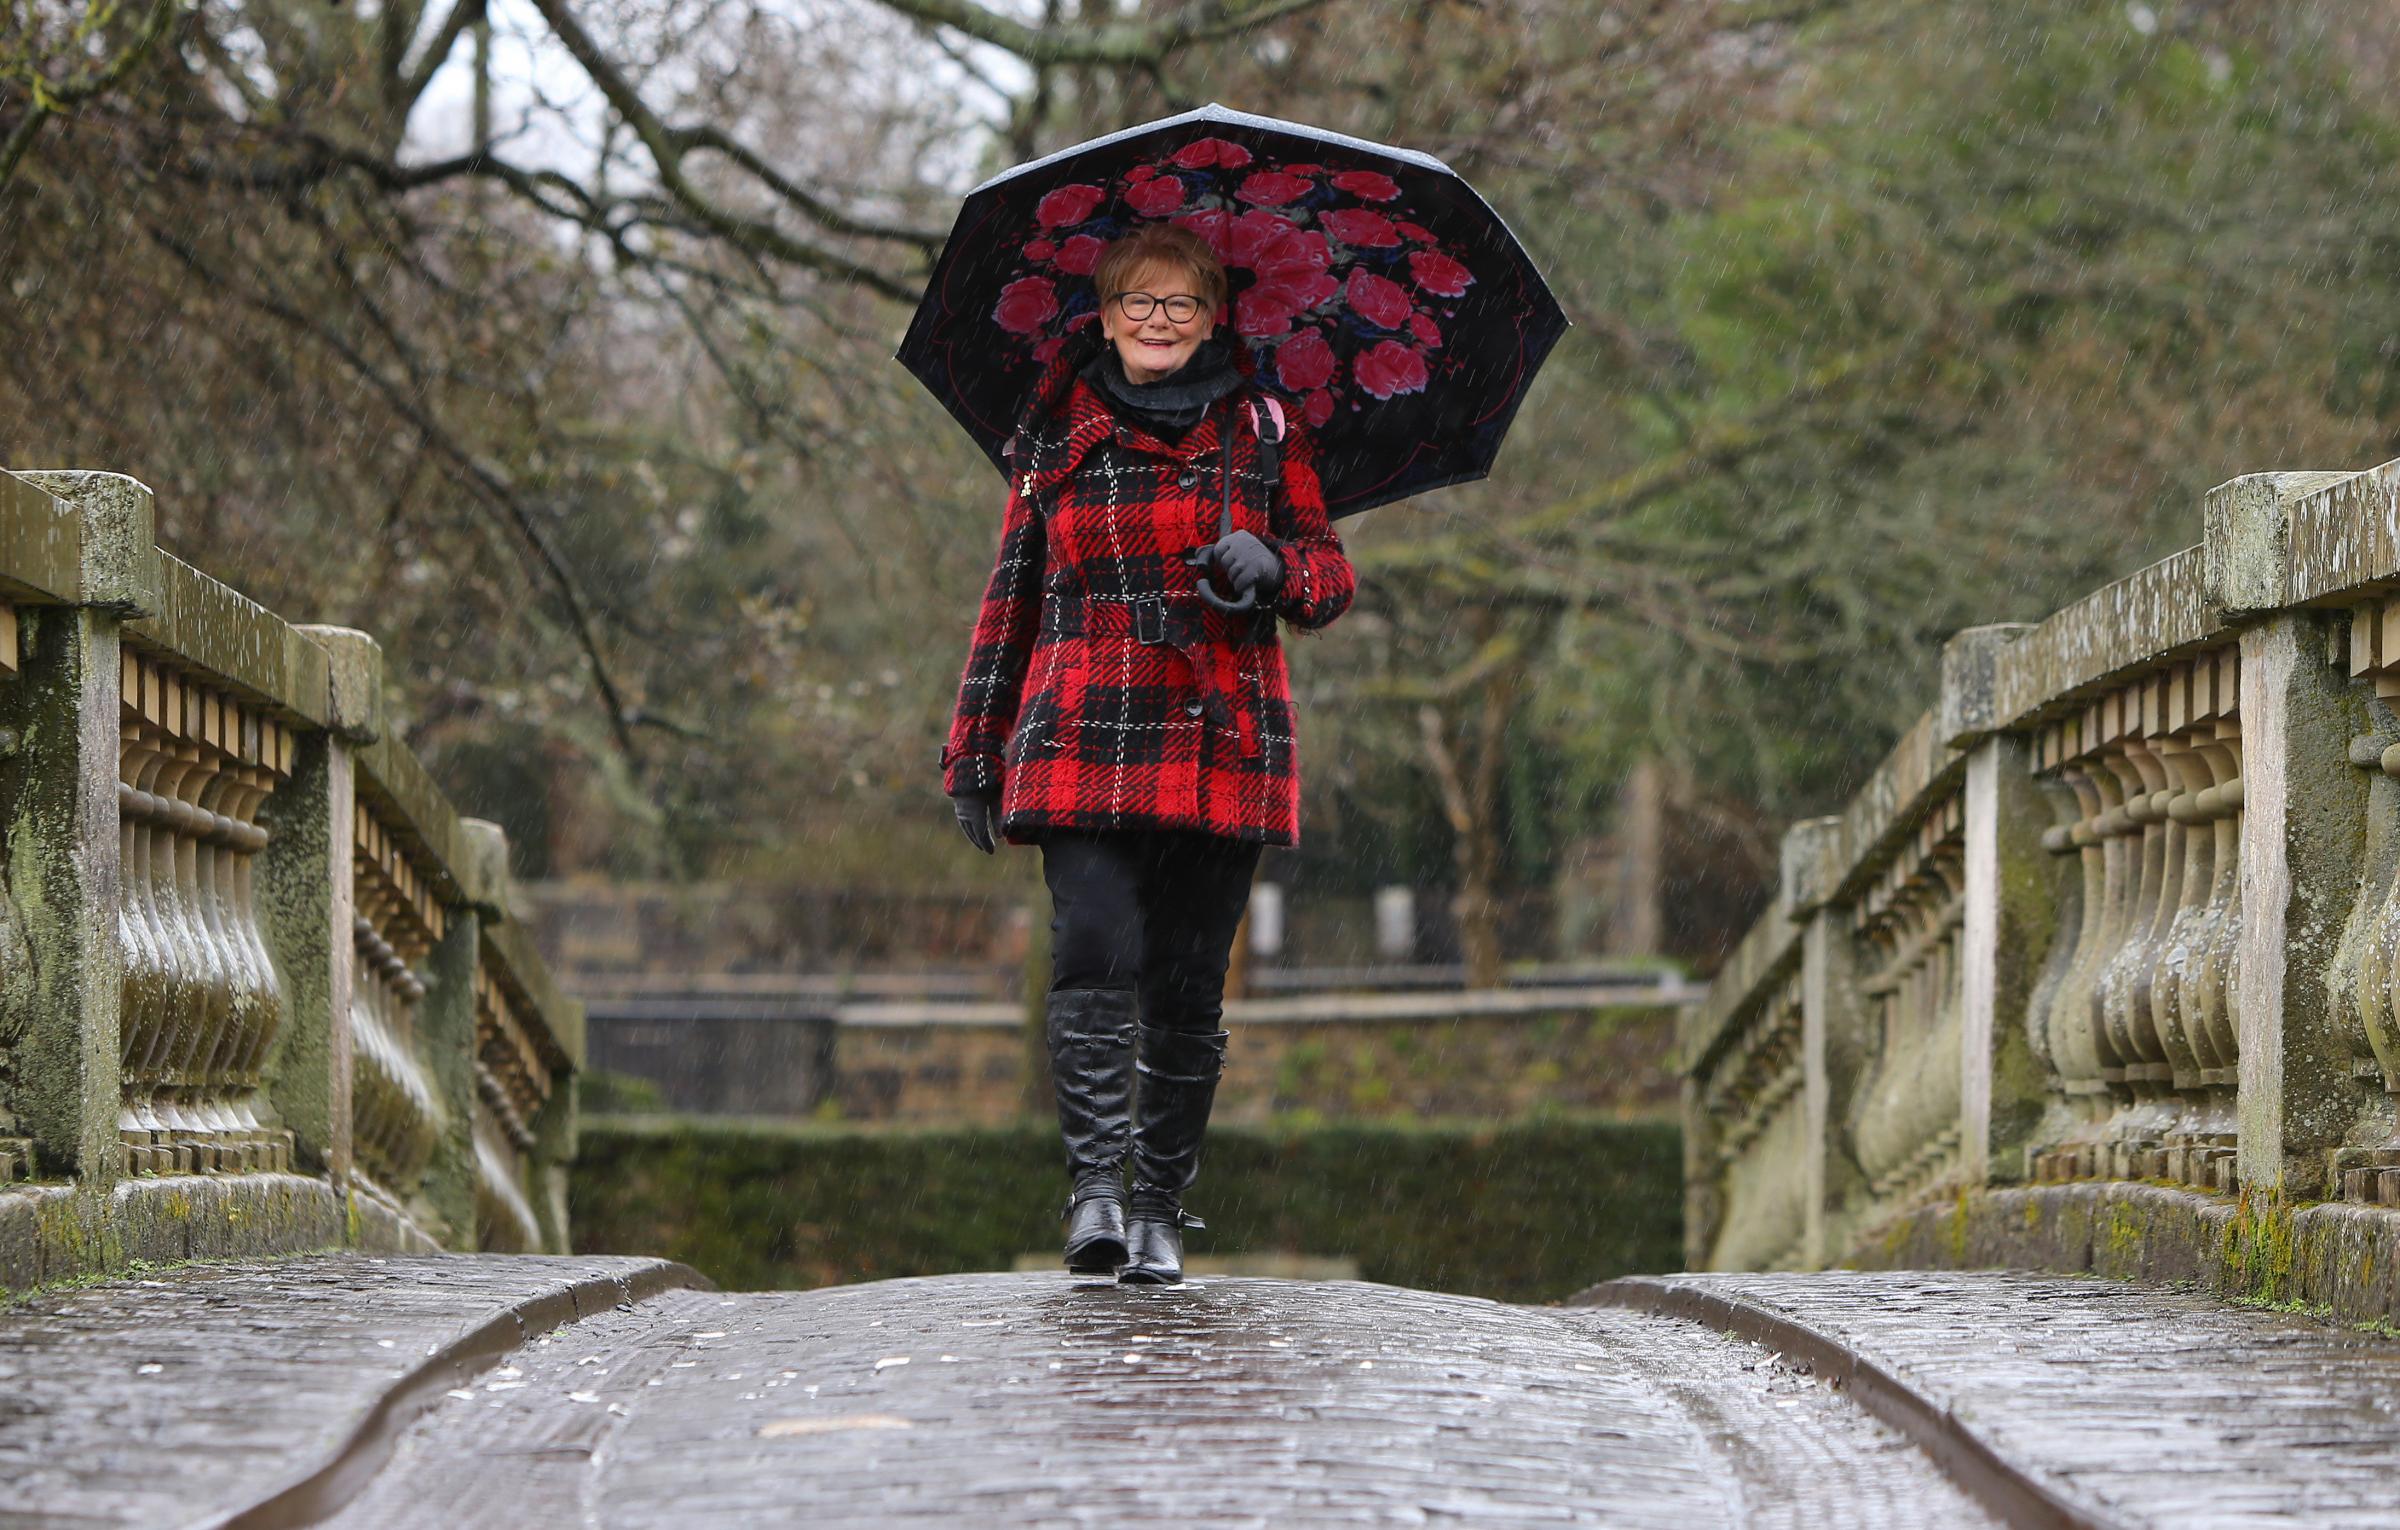 Mary Graham pictured in Pollok Country Park, Glasgow. Mary completed 280,000 steps in February 2021 to raise money for The Heralds memorial campaign. Photograph by Colin Mearns.